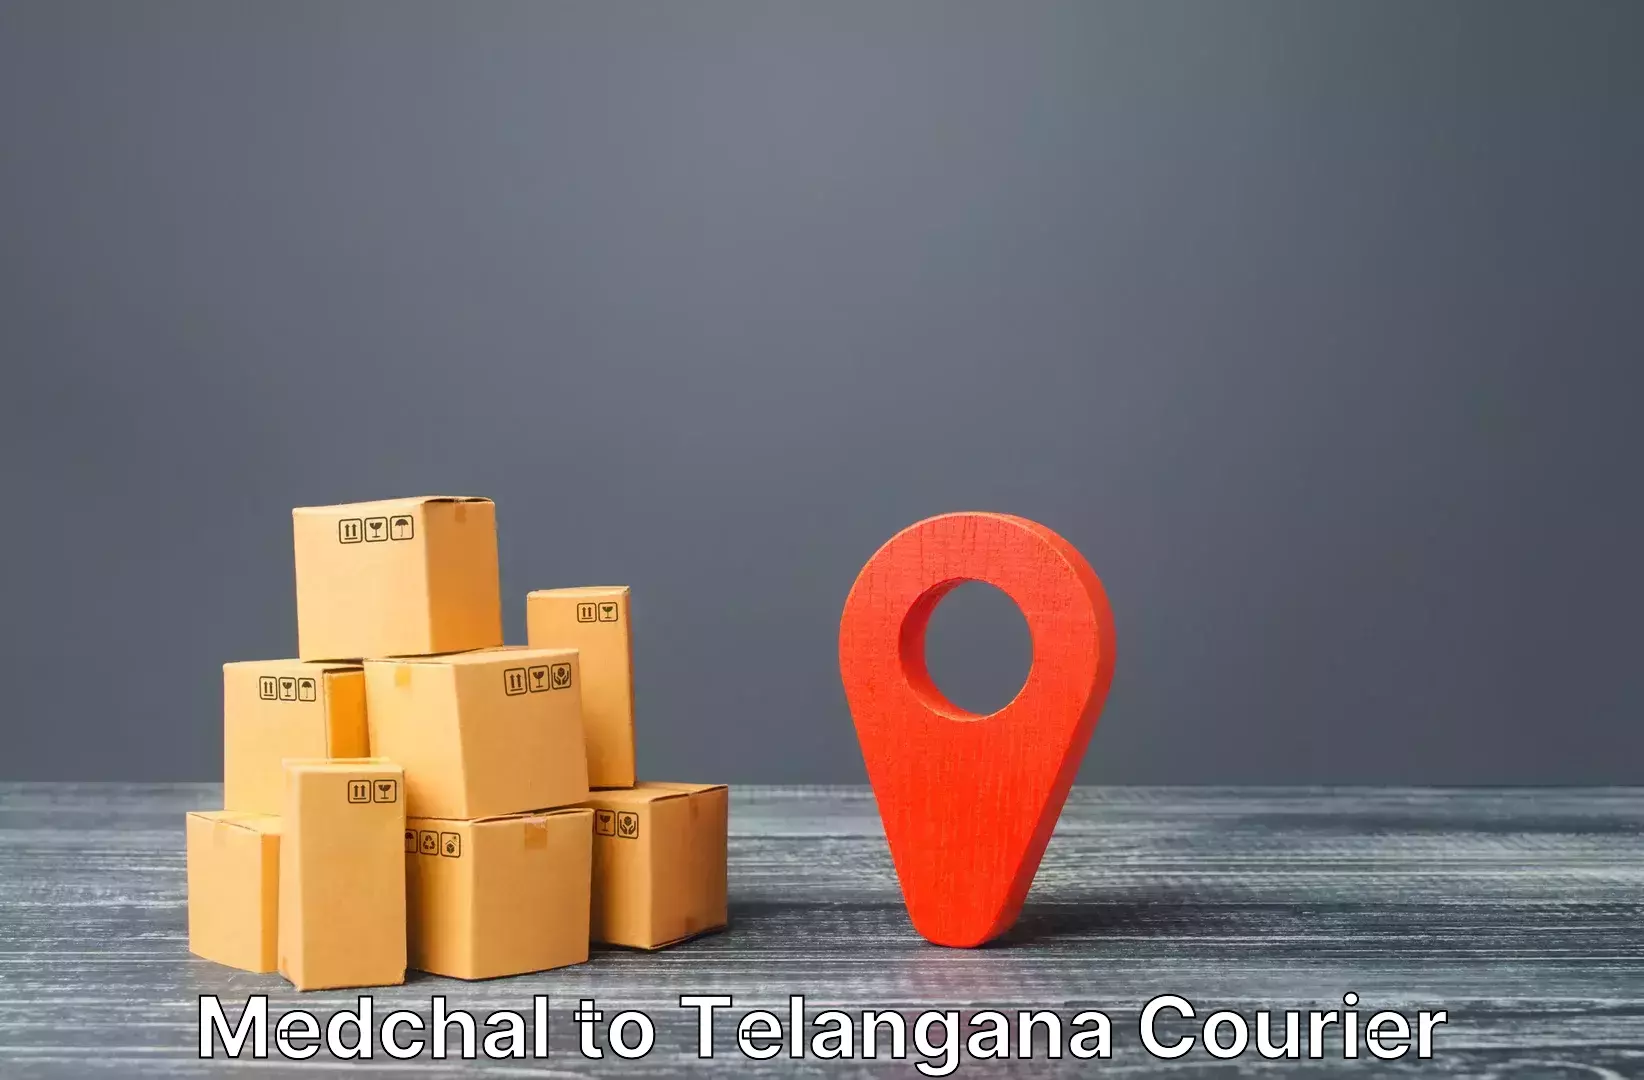 Luggage transport company Medchal to Jainad